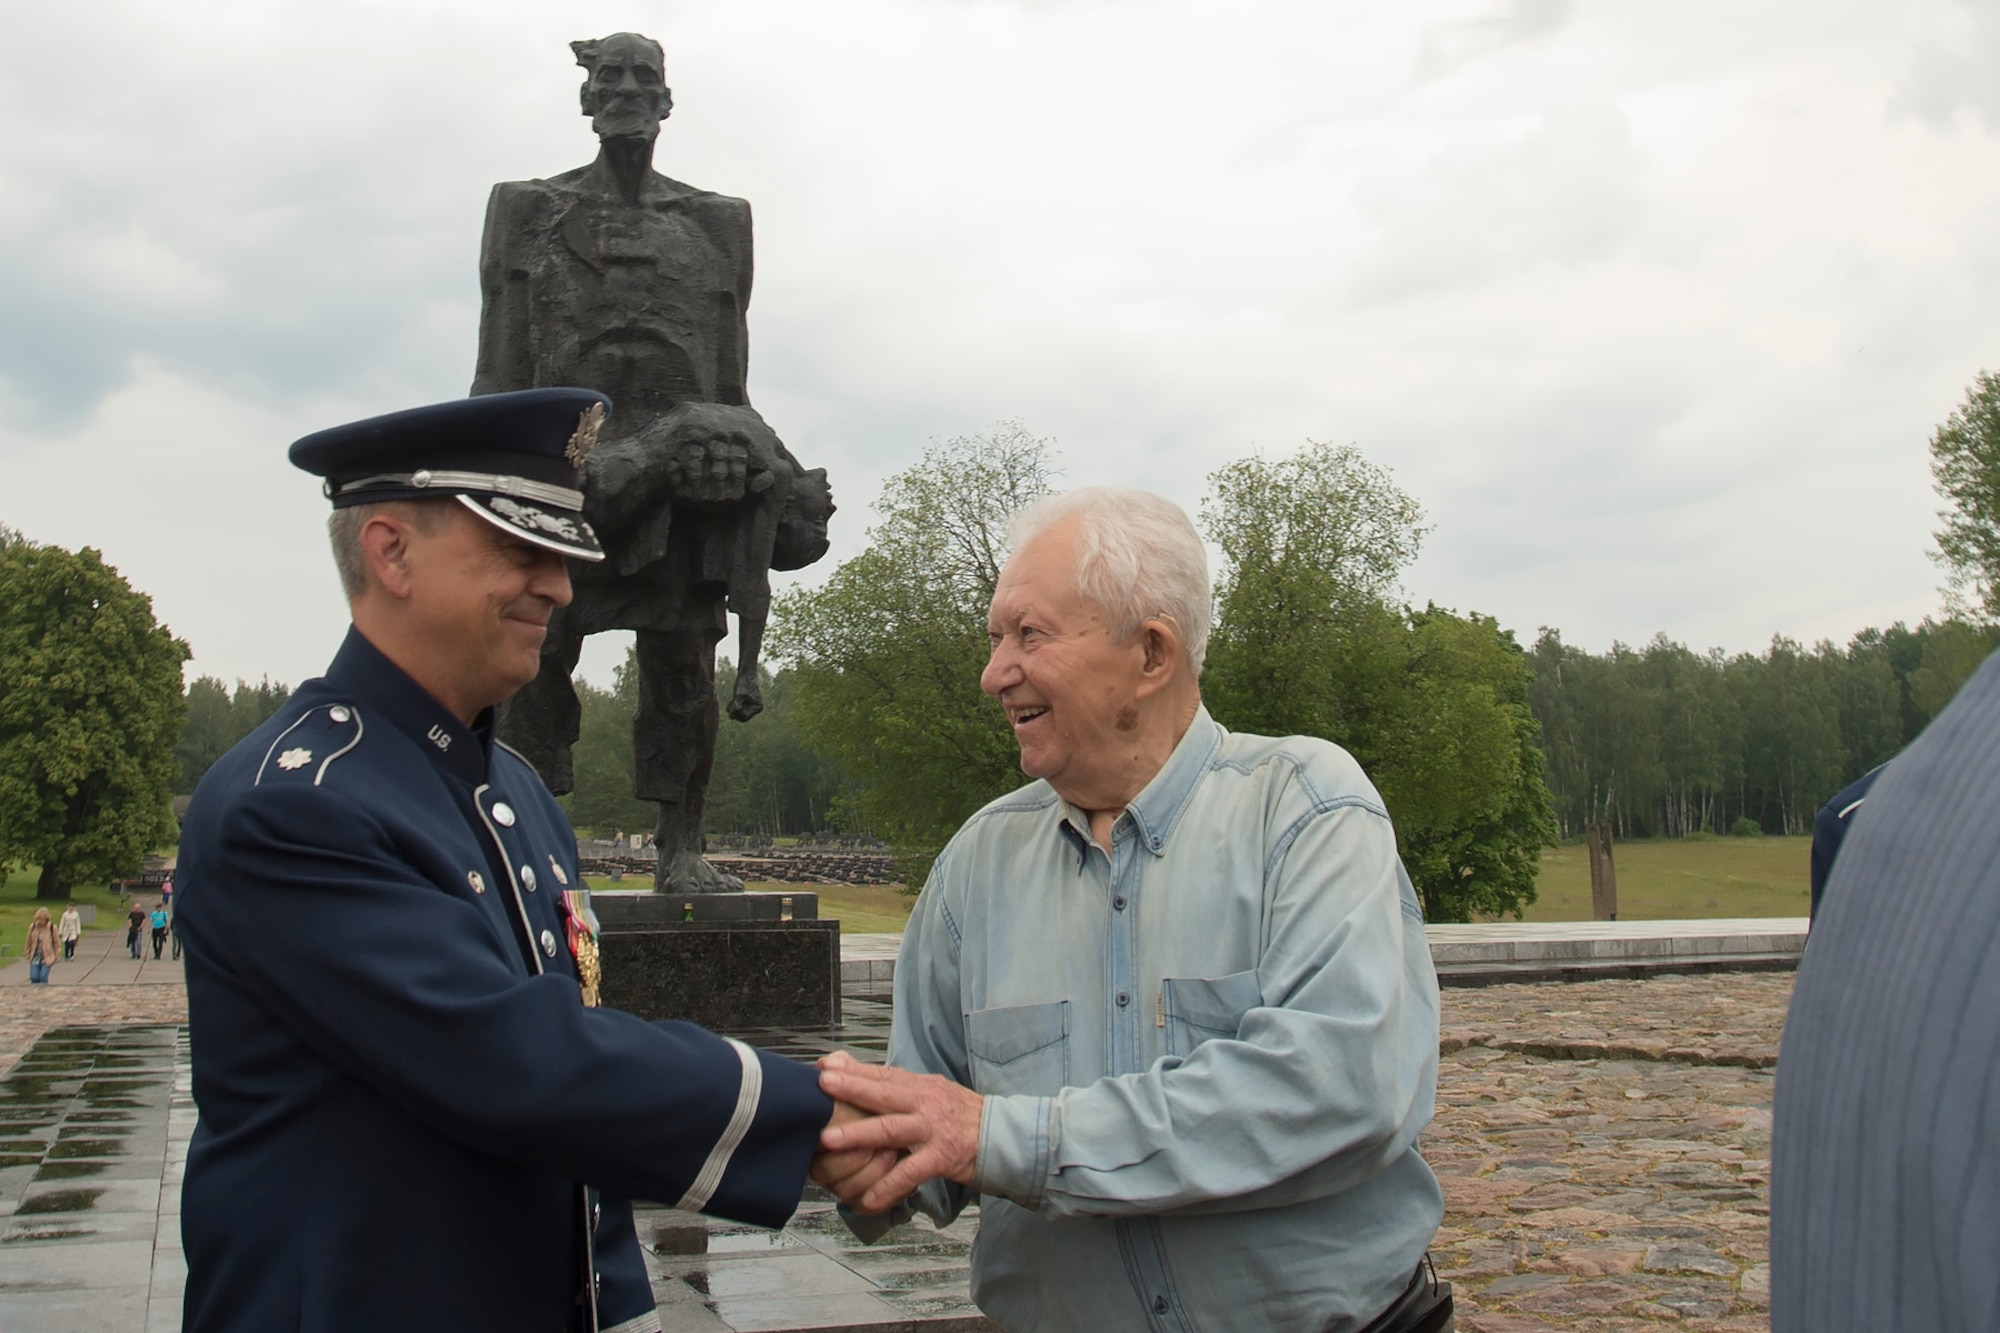 Lt. Col. Mike Mench, U.S. Air Forces in Europe Band commander, talks with Grigory, former air force wing commander for the Soviet Union, June 20, 2016, in Khatyn Memorial, Belarus. Grigory talked with Mench about his service in the military and thanked him for coming to Belarus. While in Belarus, 13 bandsmen performed at events in Minsk and surrounding communities. (U.S. Air Force photo/Technical Sgt. Paul Villanueva II)